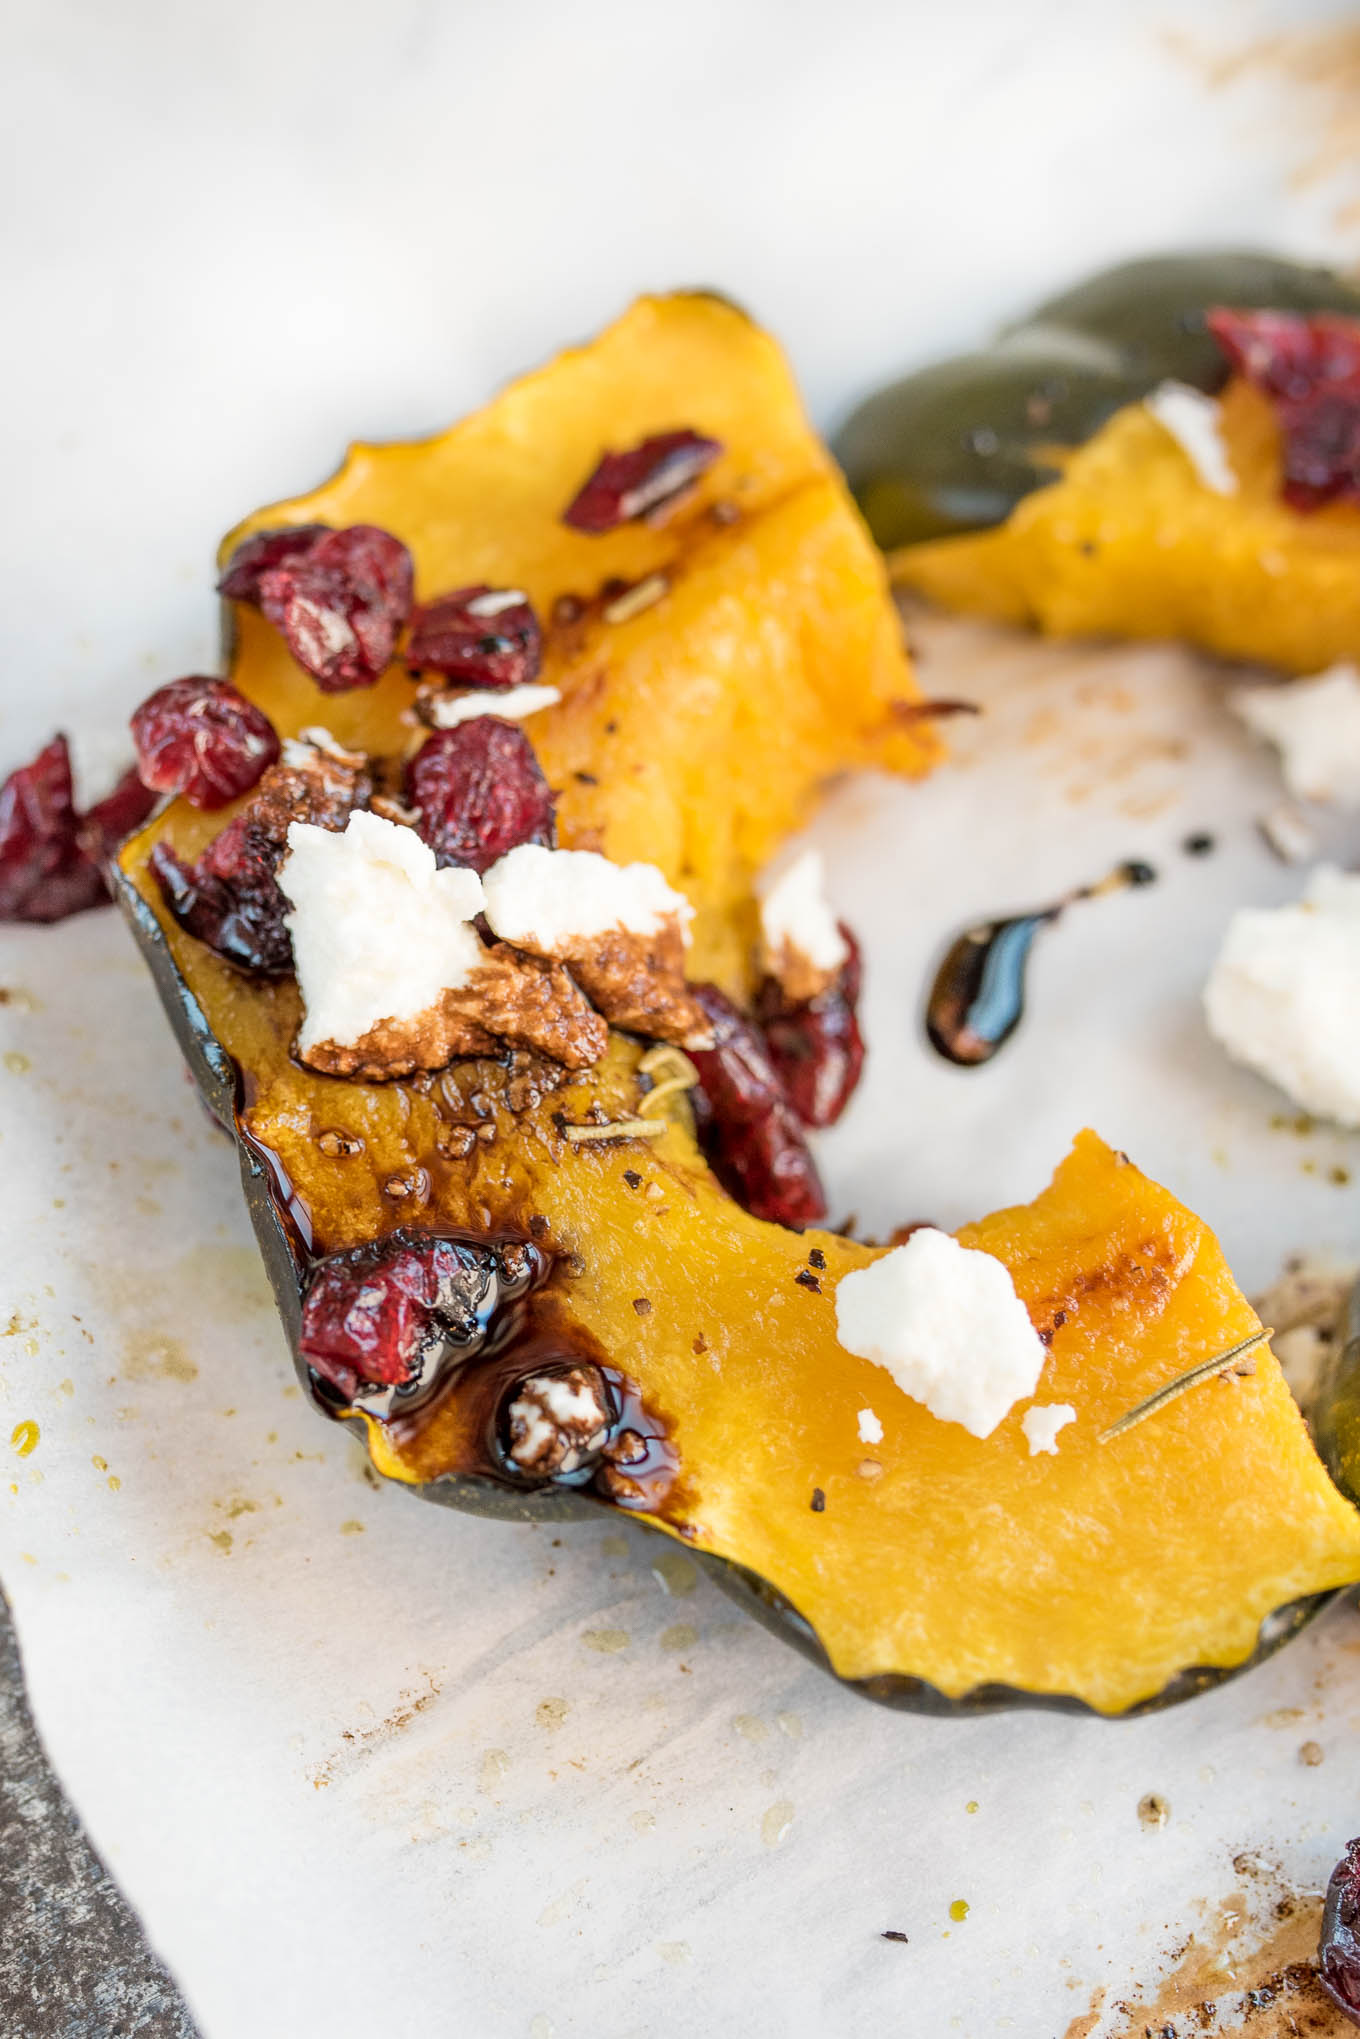 Roasted Acorn Squash with Cranberries, Goat Cheese and Balsamic Glaze #glutenfree #vegetarian side that will be perfect on your Holiday table | www.nutritiouseats.com 